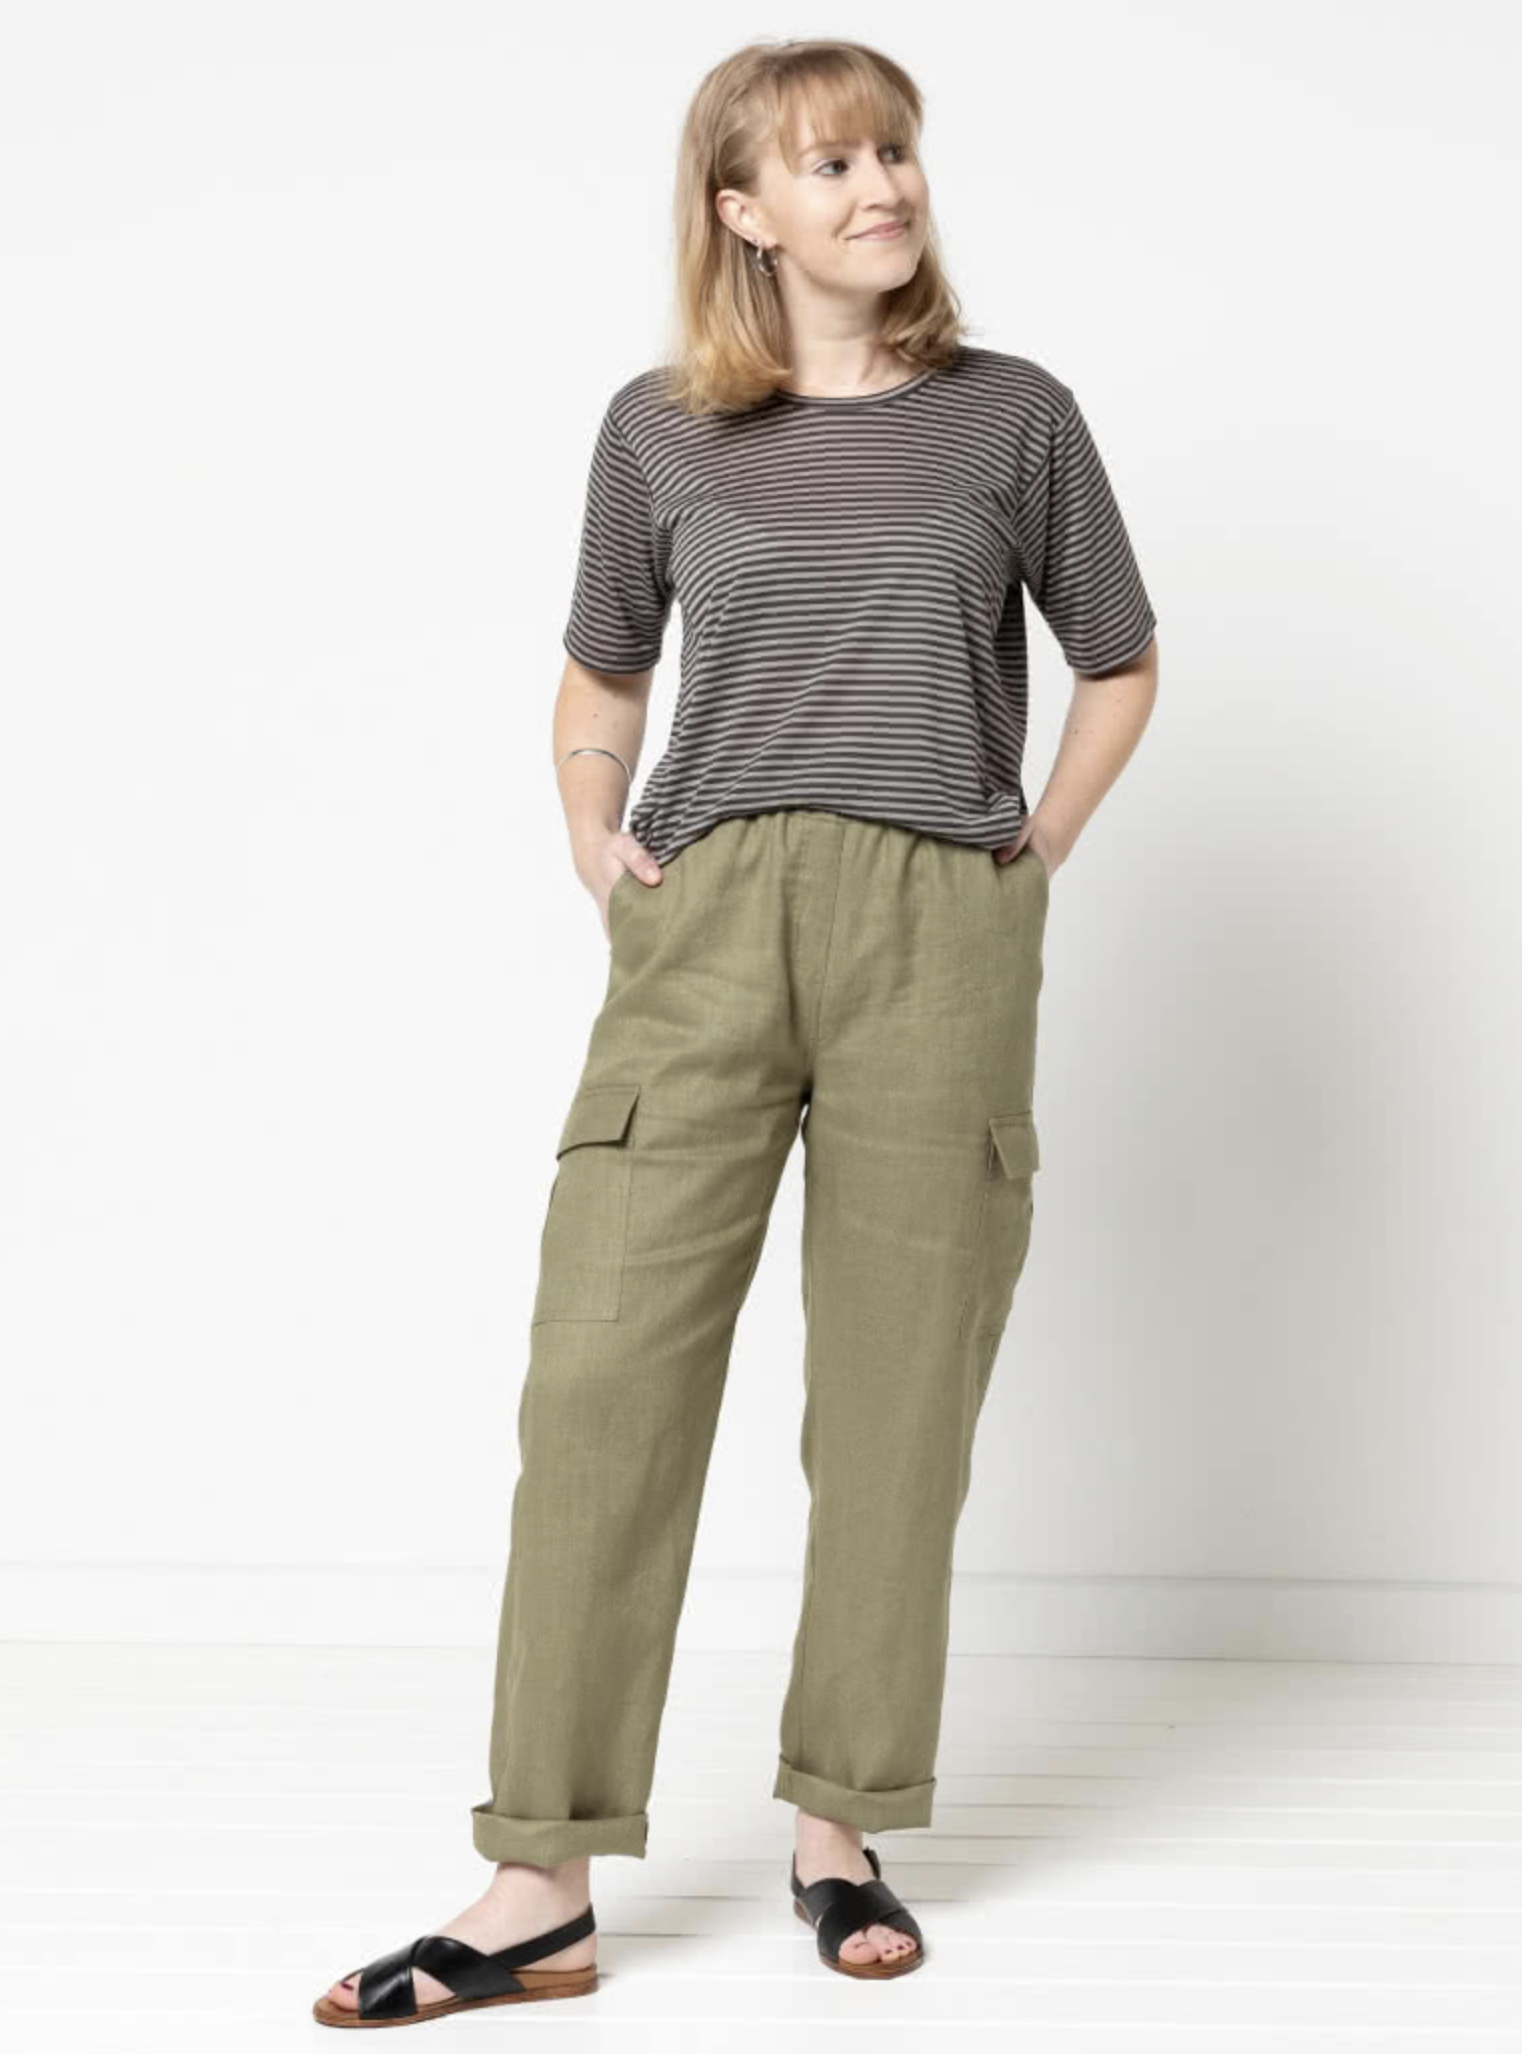 Woman wearing the Delta Cargo Pant sewing pattern from Style Arc on The Fold Line. A cargo trouser pattern made in drill, denim, light wool or washed linen fabrics, featuring a straight leg, elastic waist, faux fly, front slant pockets, back patch pockets, and side leg patch pockets with flap.